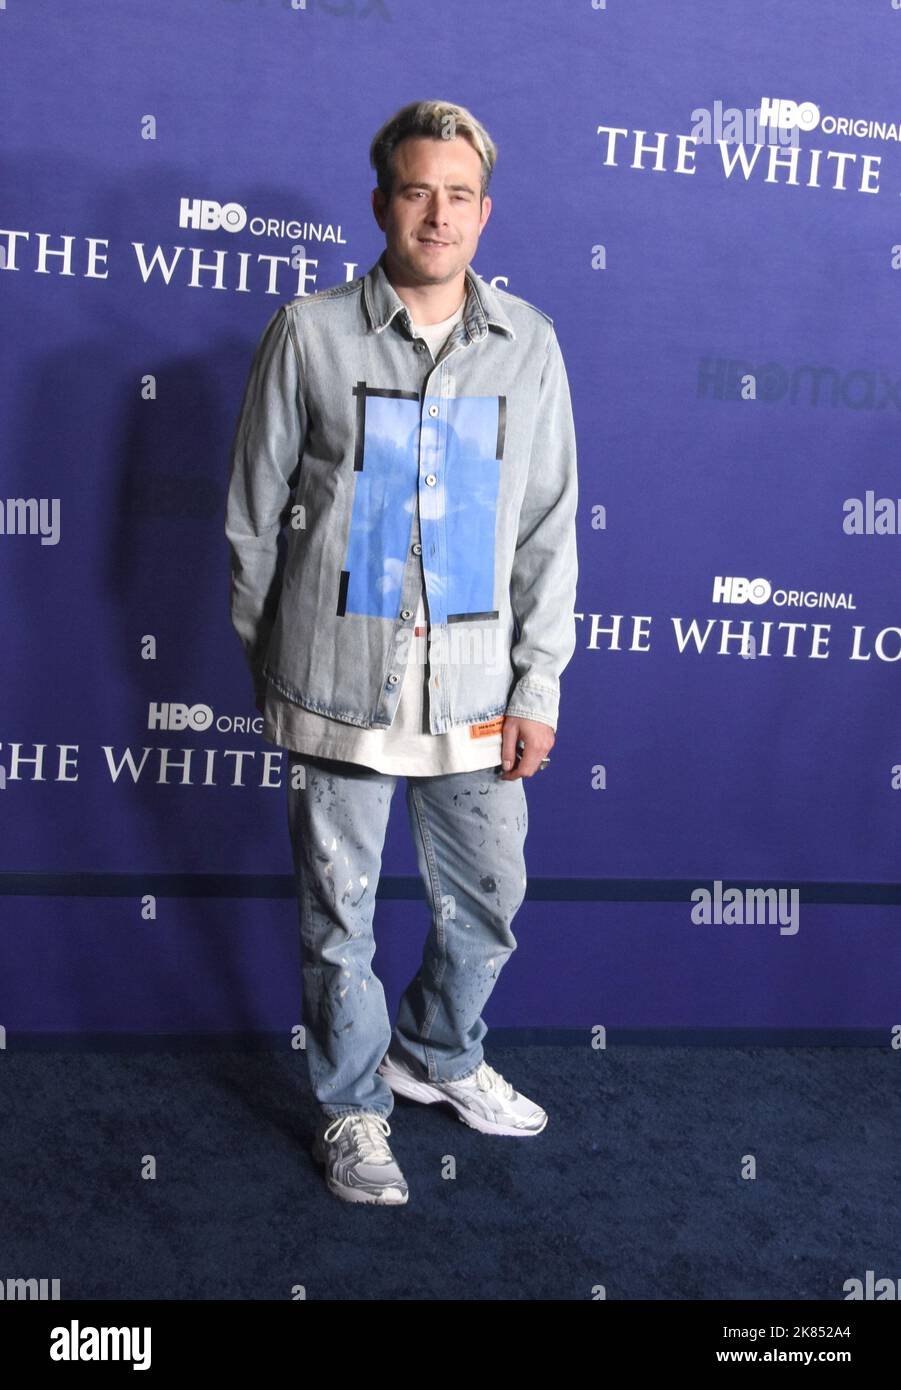 Los Angeles, California, USA 20th October 2022 Screenwriter Max Borenstein attends HBO Original 'The White Lotus' Season 2 Red Carpet Premiere at Goya Studios on October 20, 2022 in Los Angeles, California, USA. Photo by Barry King/Alamy Live News Stock Photo